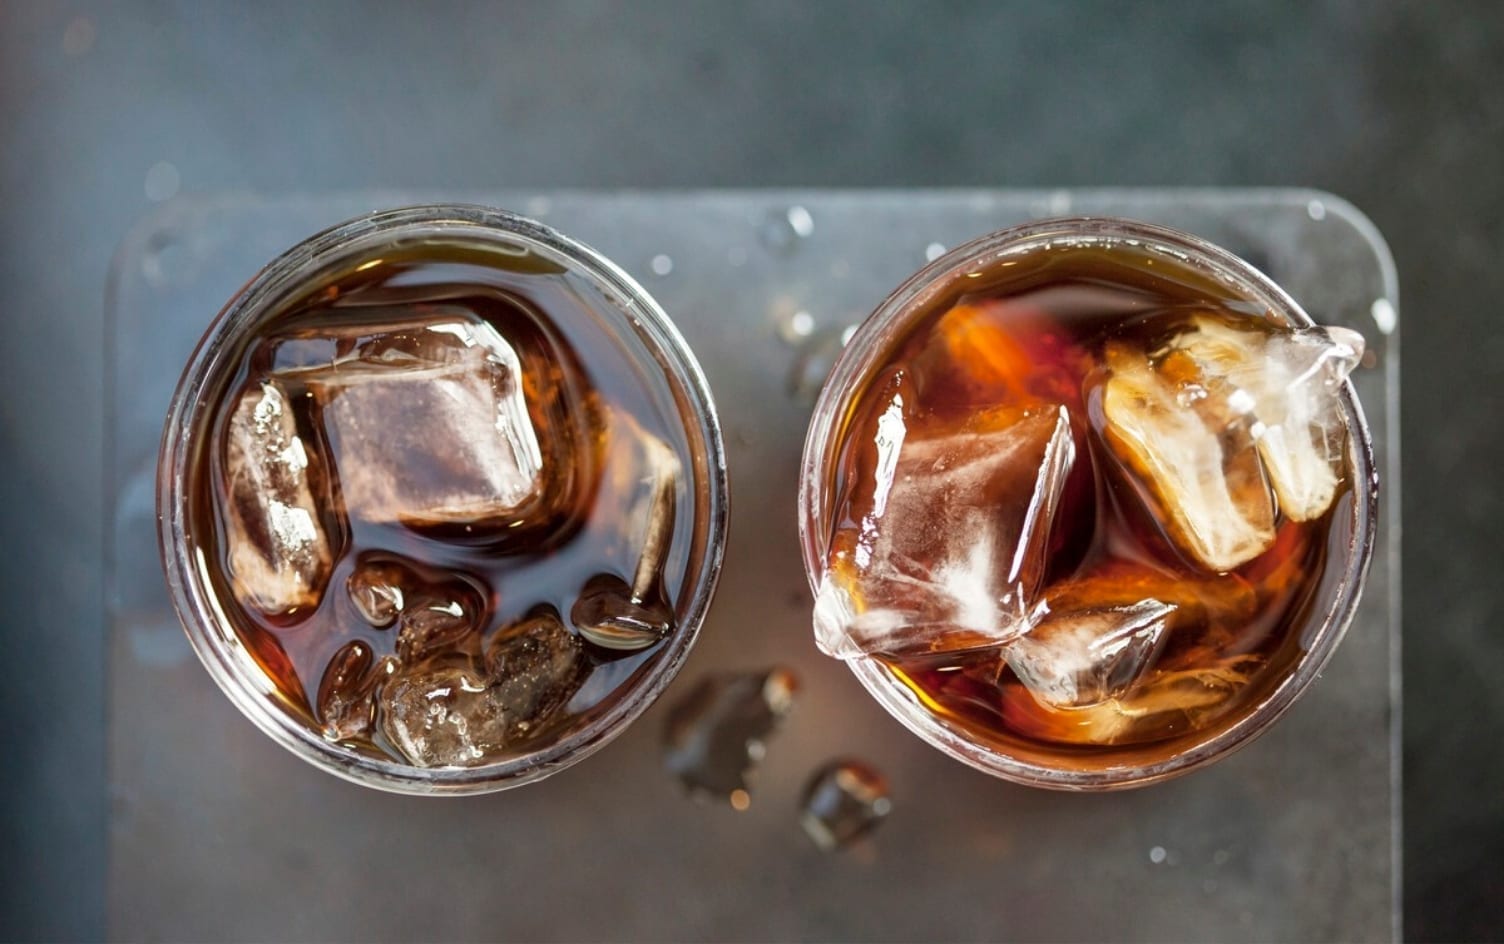 https://blog.myfitnesspal.com/wp-content/uploads/2020/07/5-Reasons-to-Embrace-Cold-Brew-.jpg